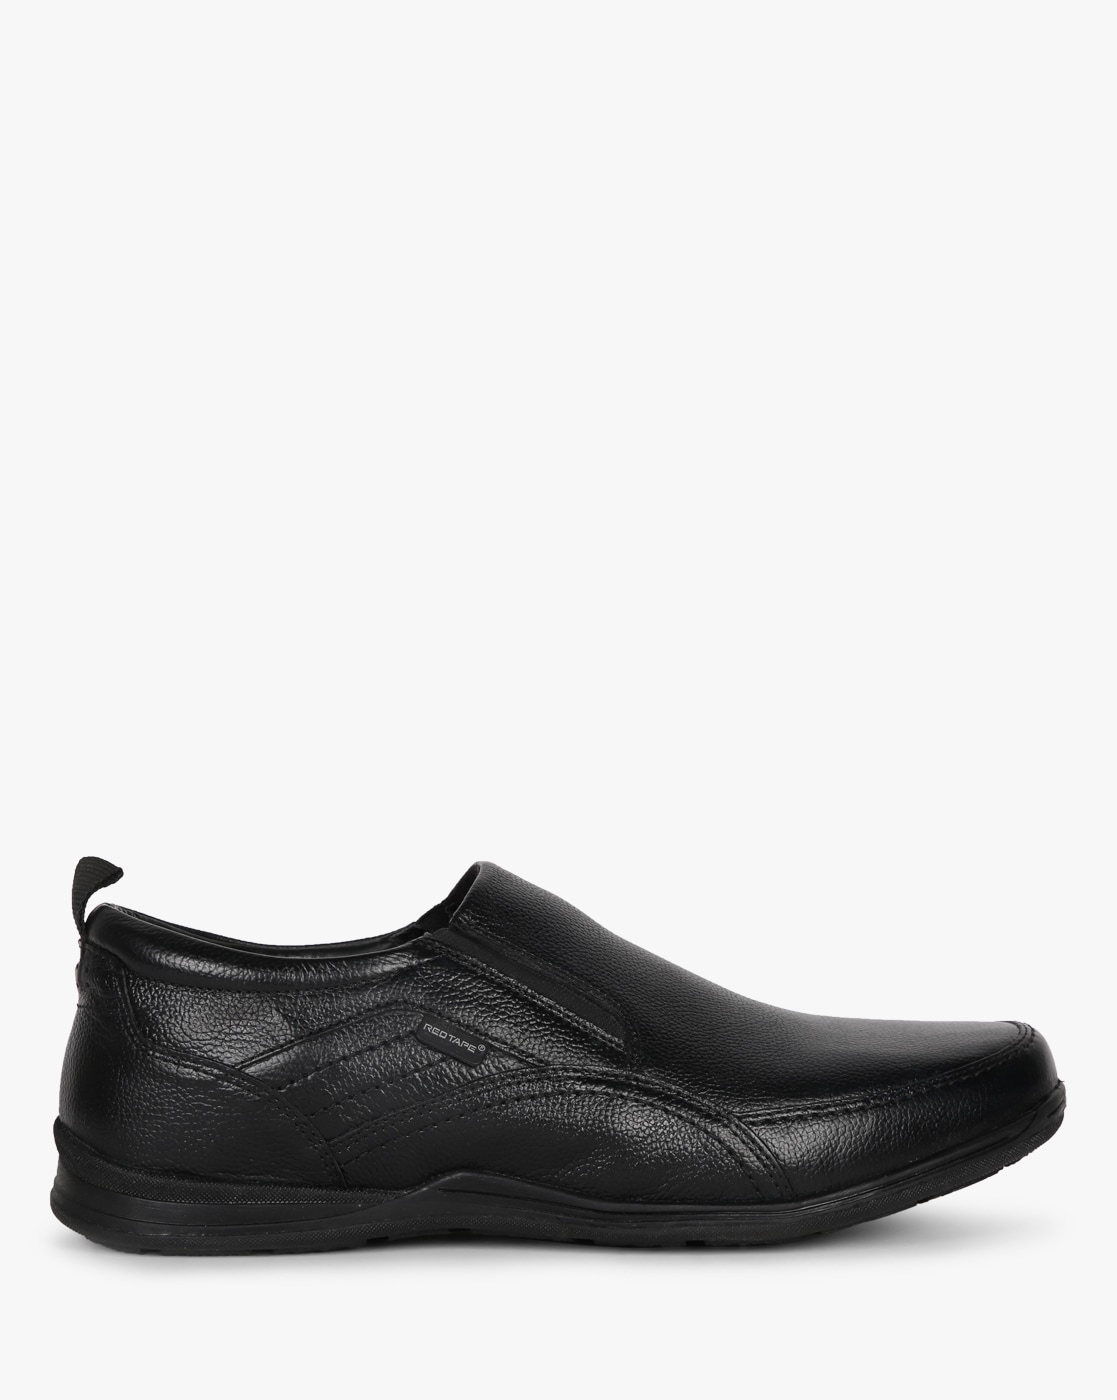 red tape slip on formal shoes